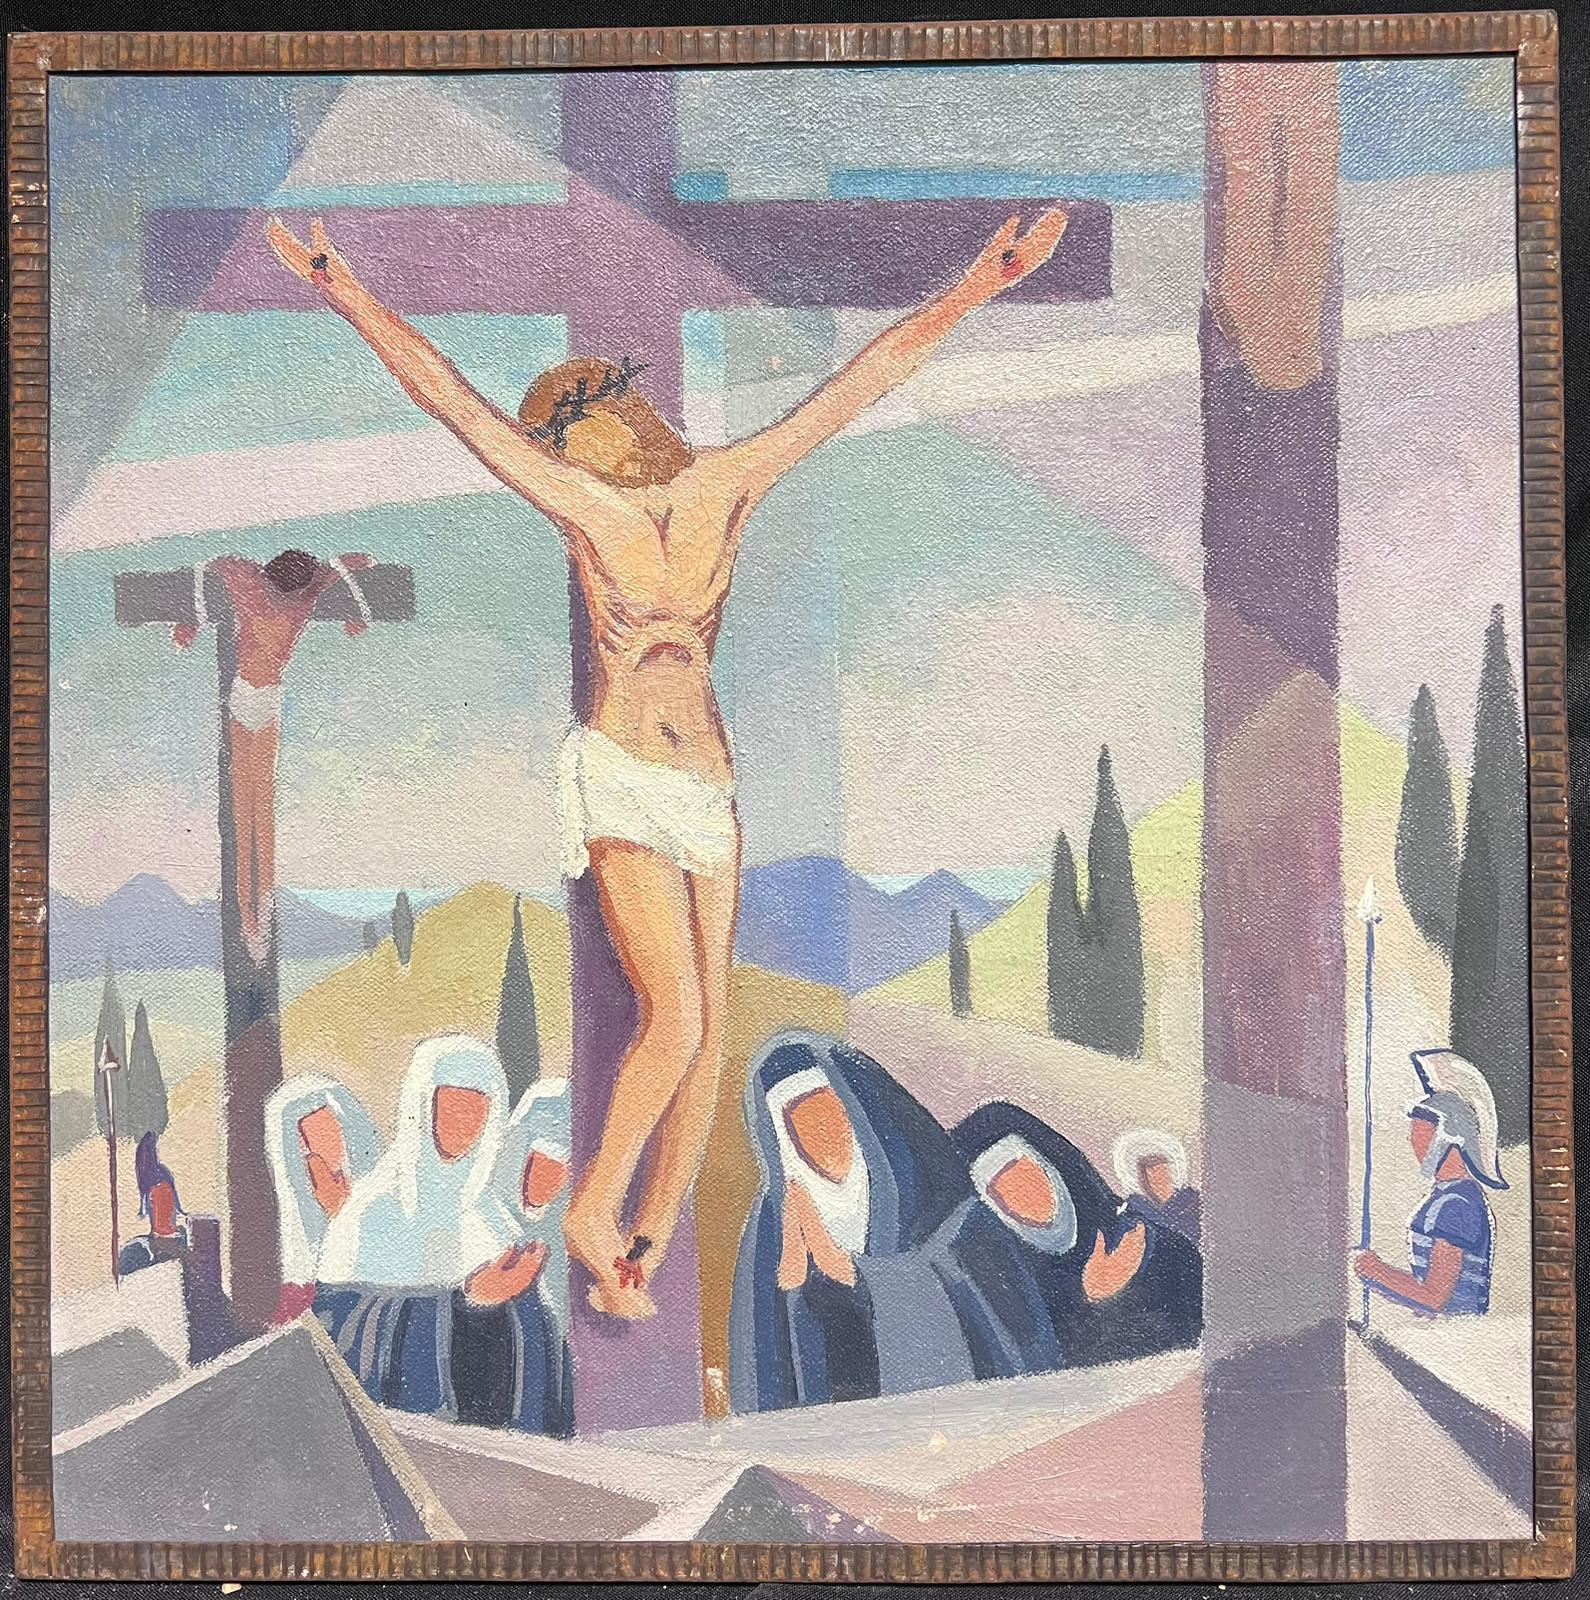 One of the Stations of the Cross
by Jean La Forgue (French 1901-1975)  *see notes below
oil painting on canvas, housed in original metal frame
overall dimensions: 17 x 17 inches
provenance: the artists estate, France
condition: very good and sound